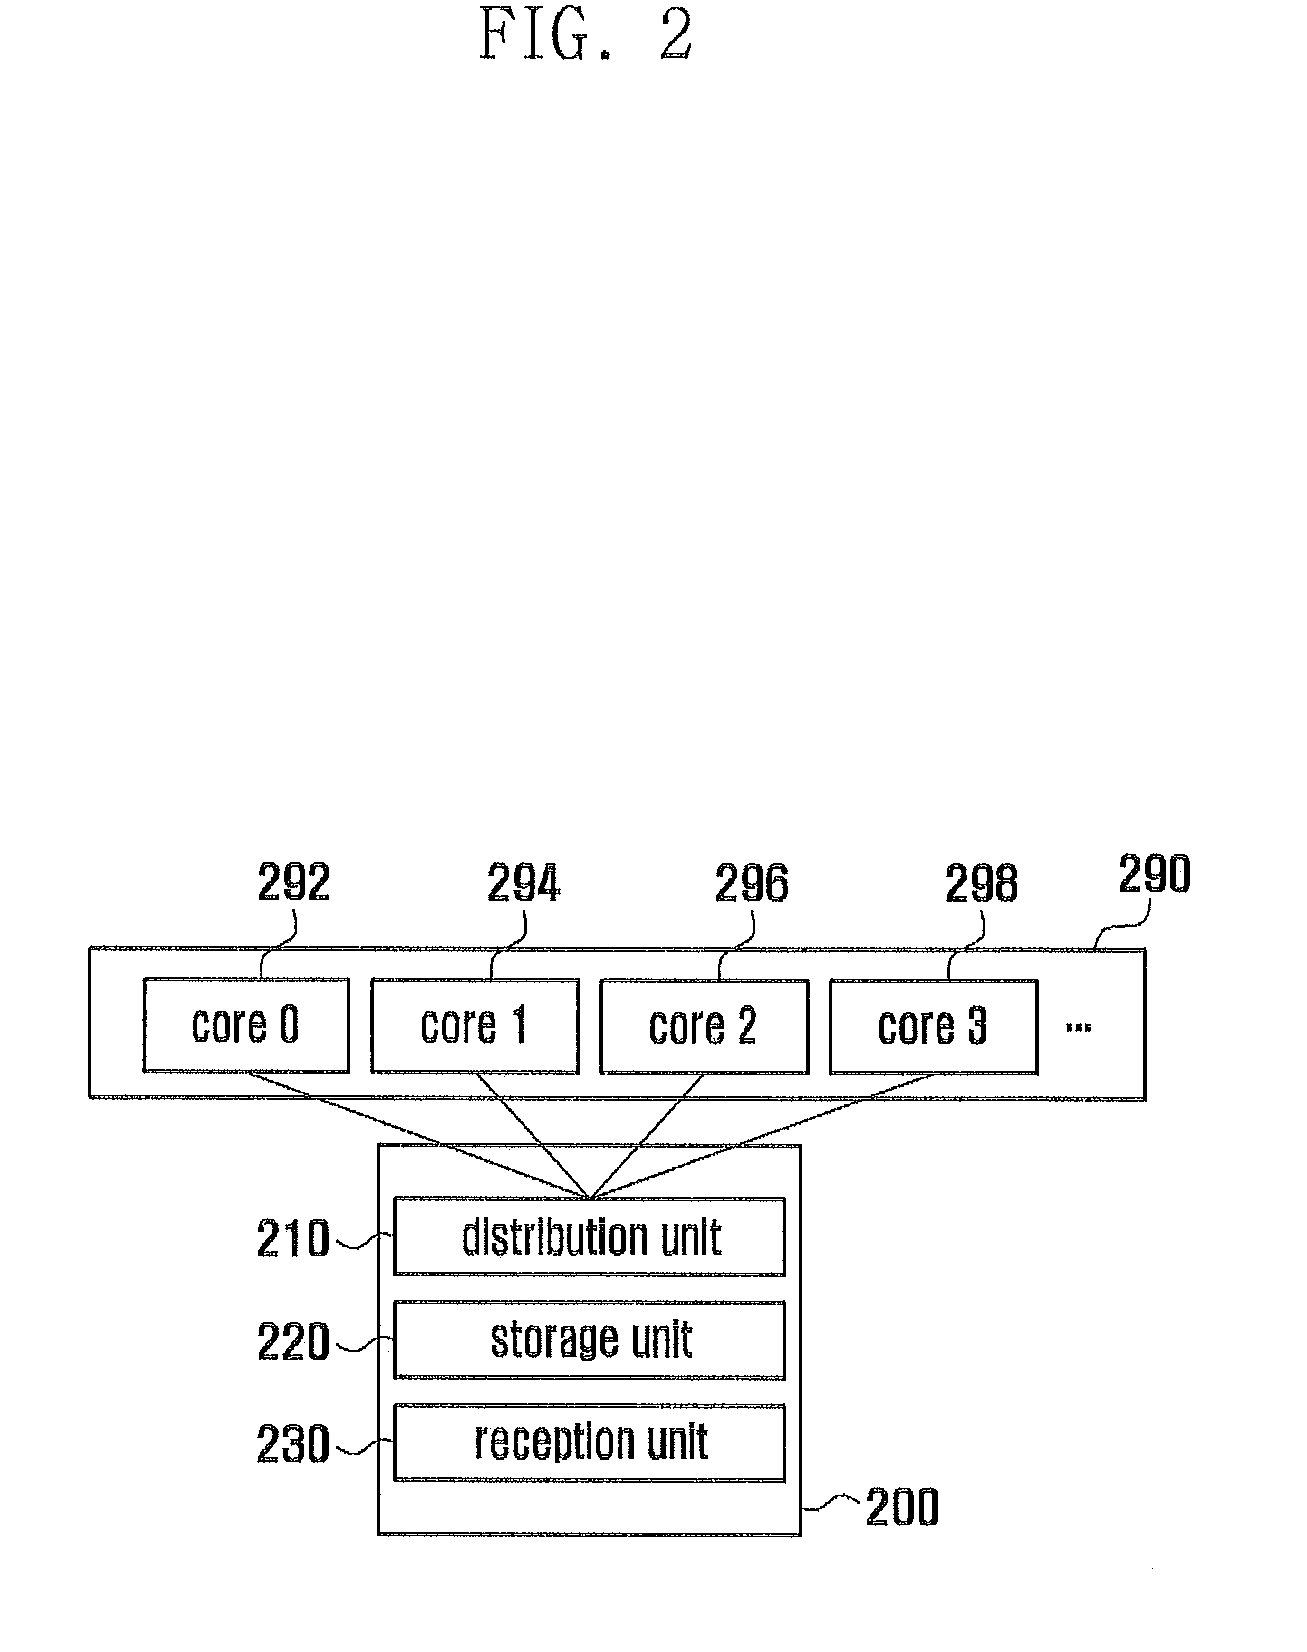 Method and apparatus for allocating interruptions